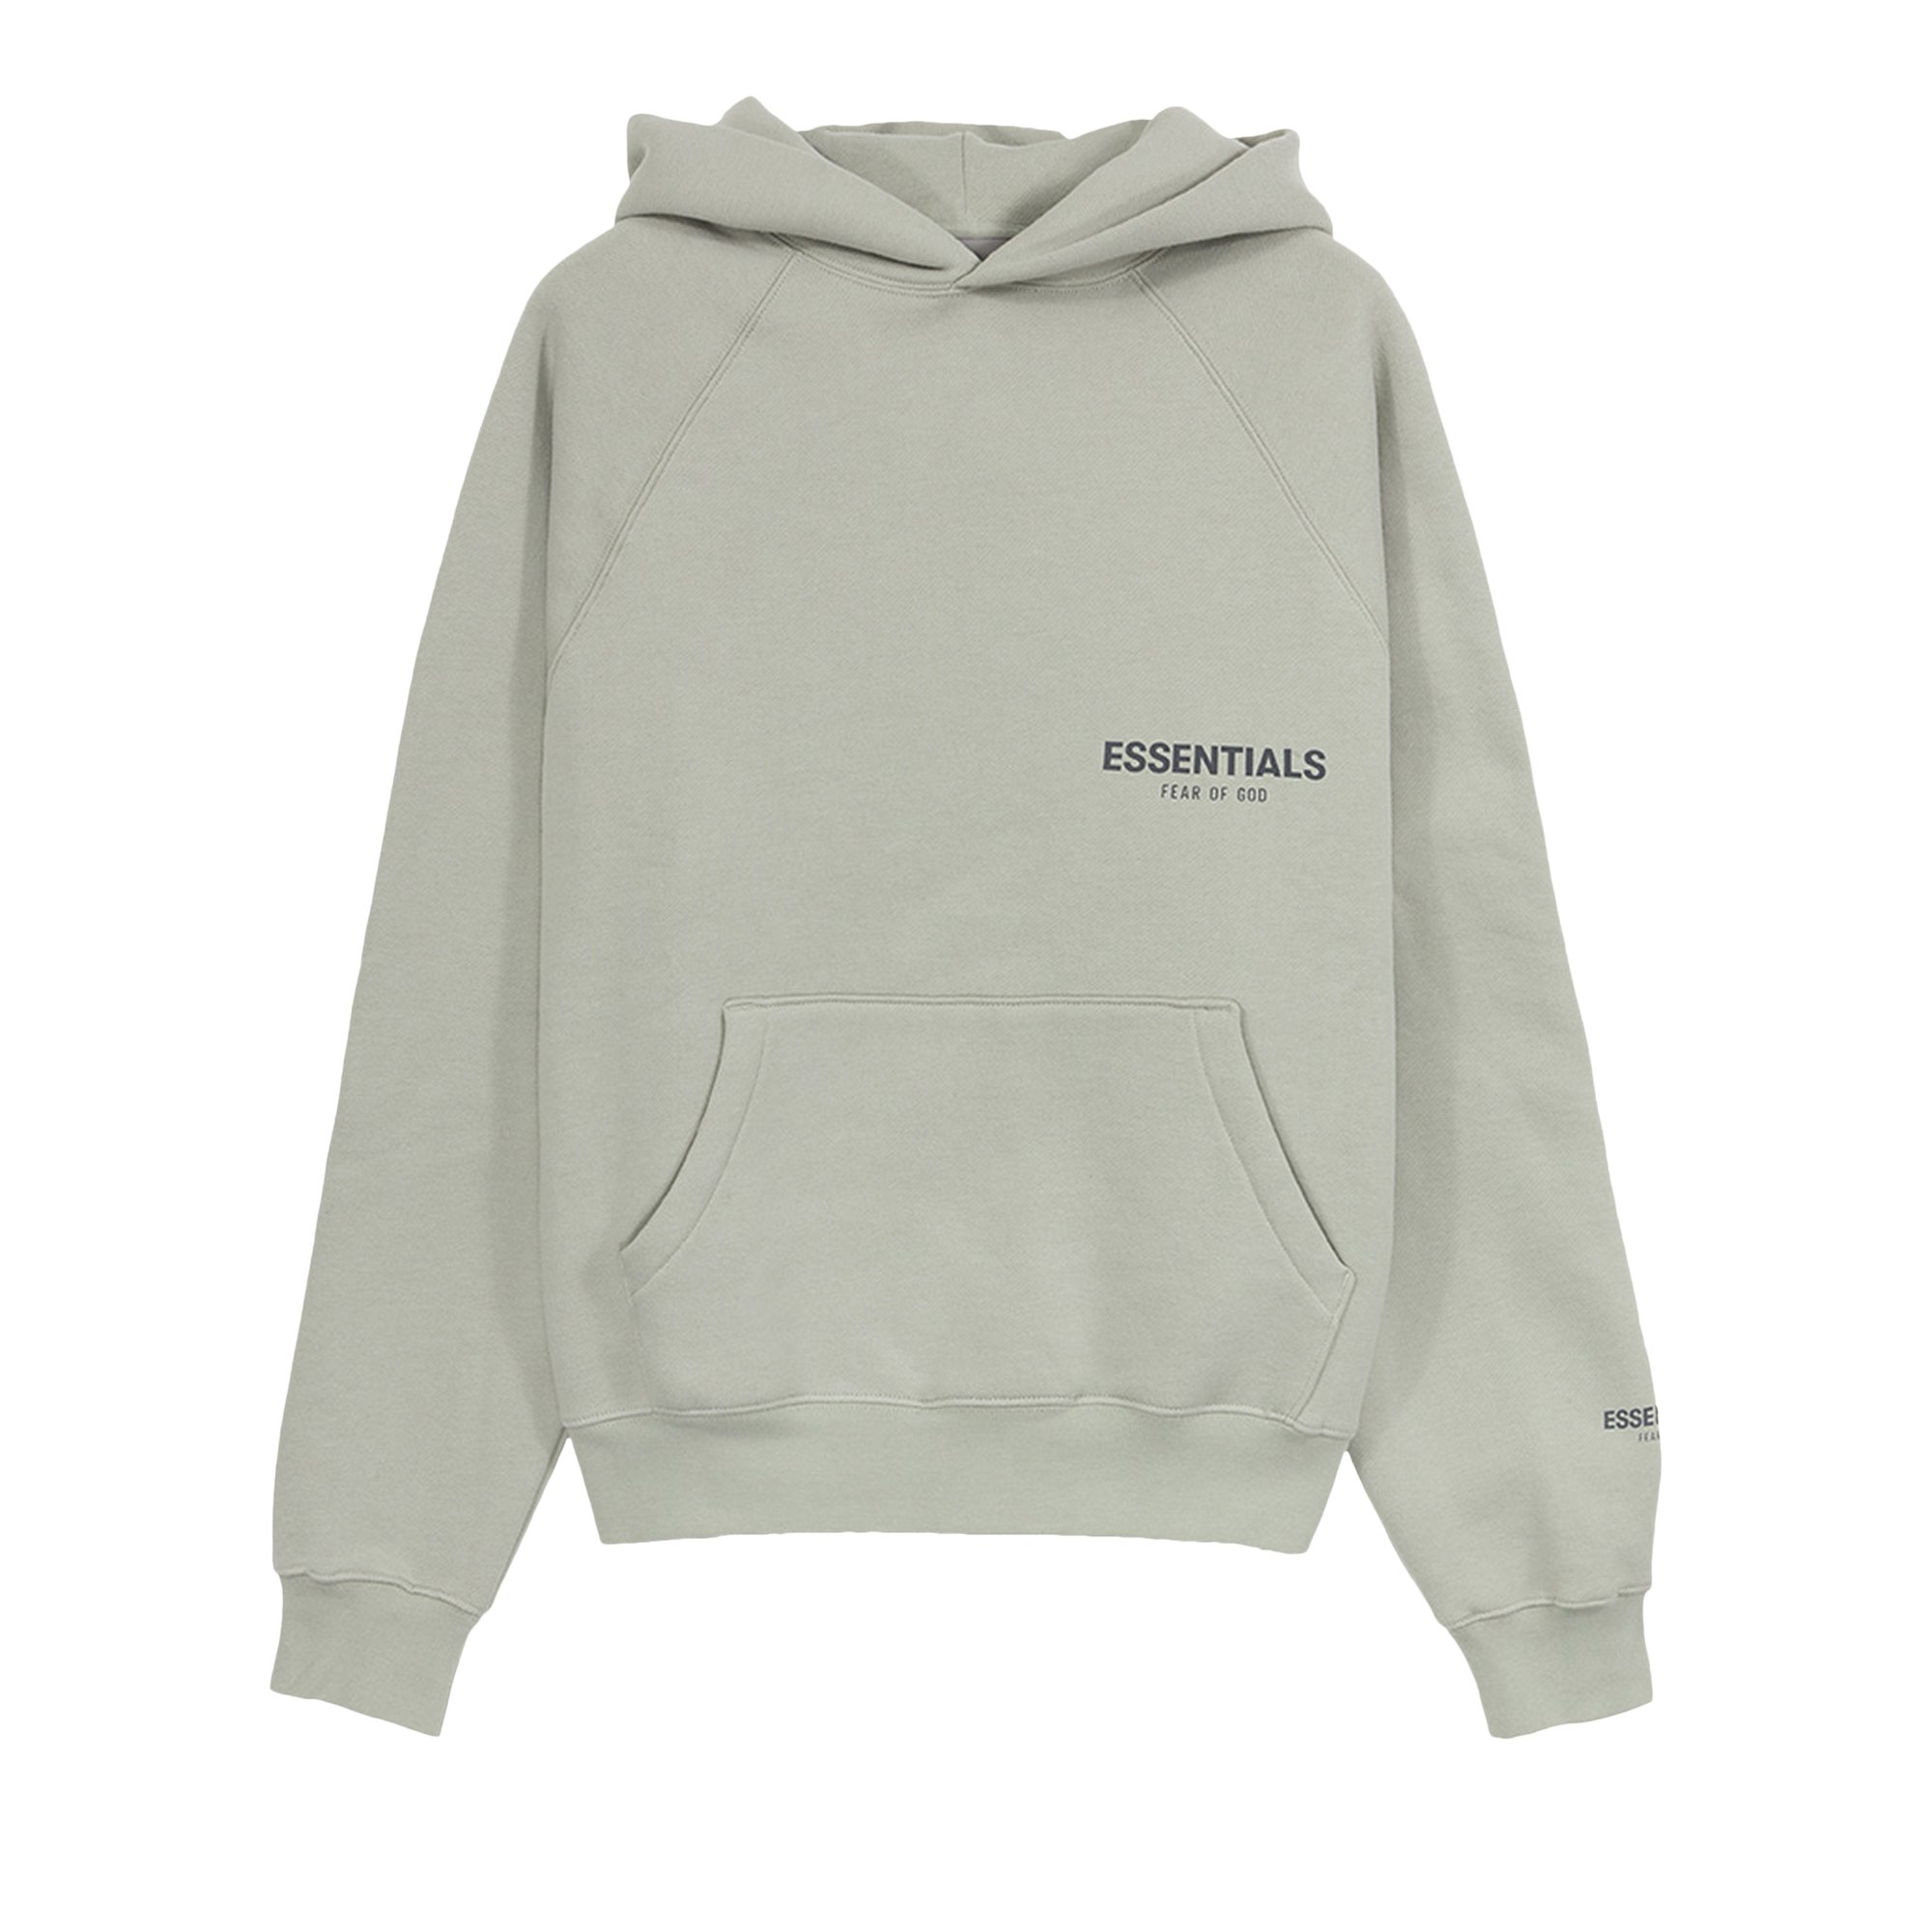 Buy Fear of God Essentials x SSENSE Pullover Hoodie 'Green